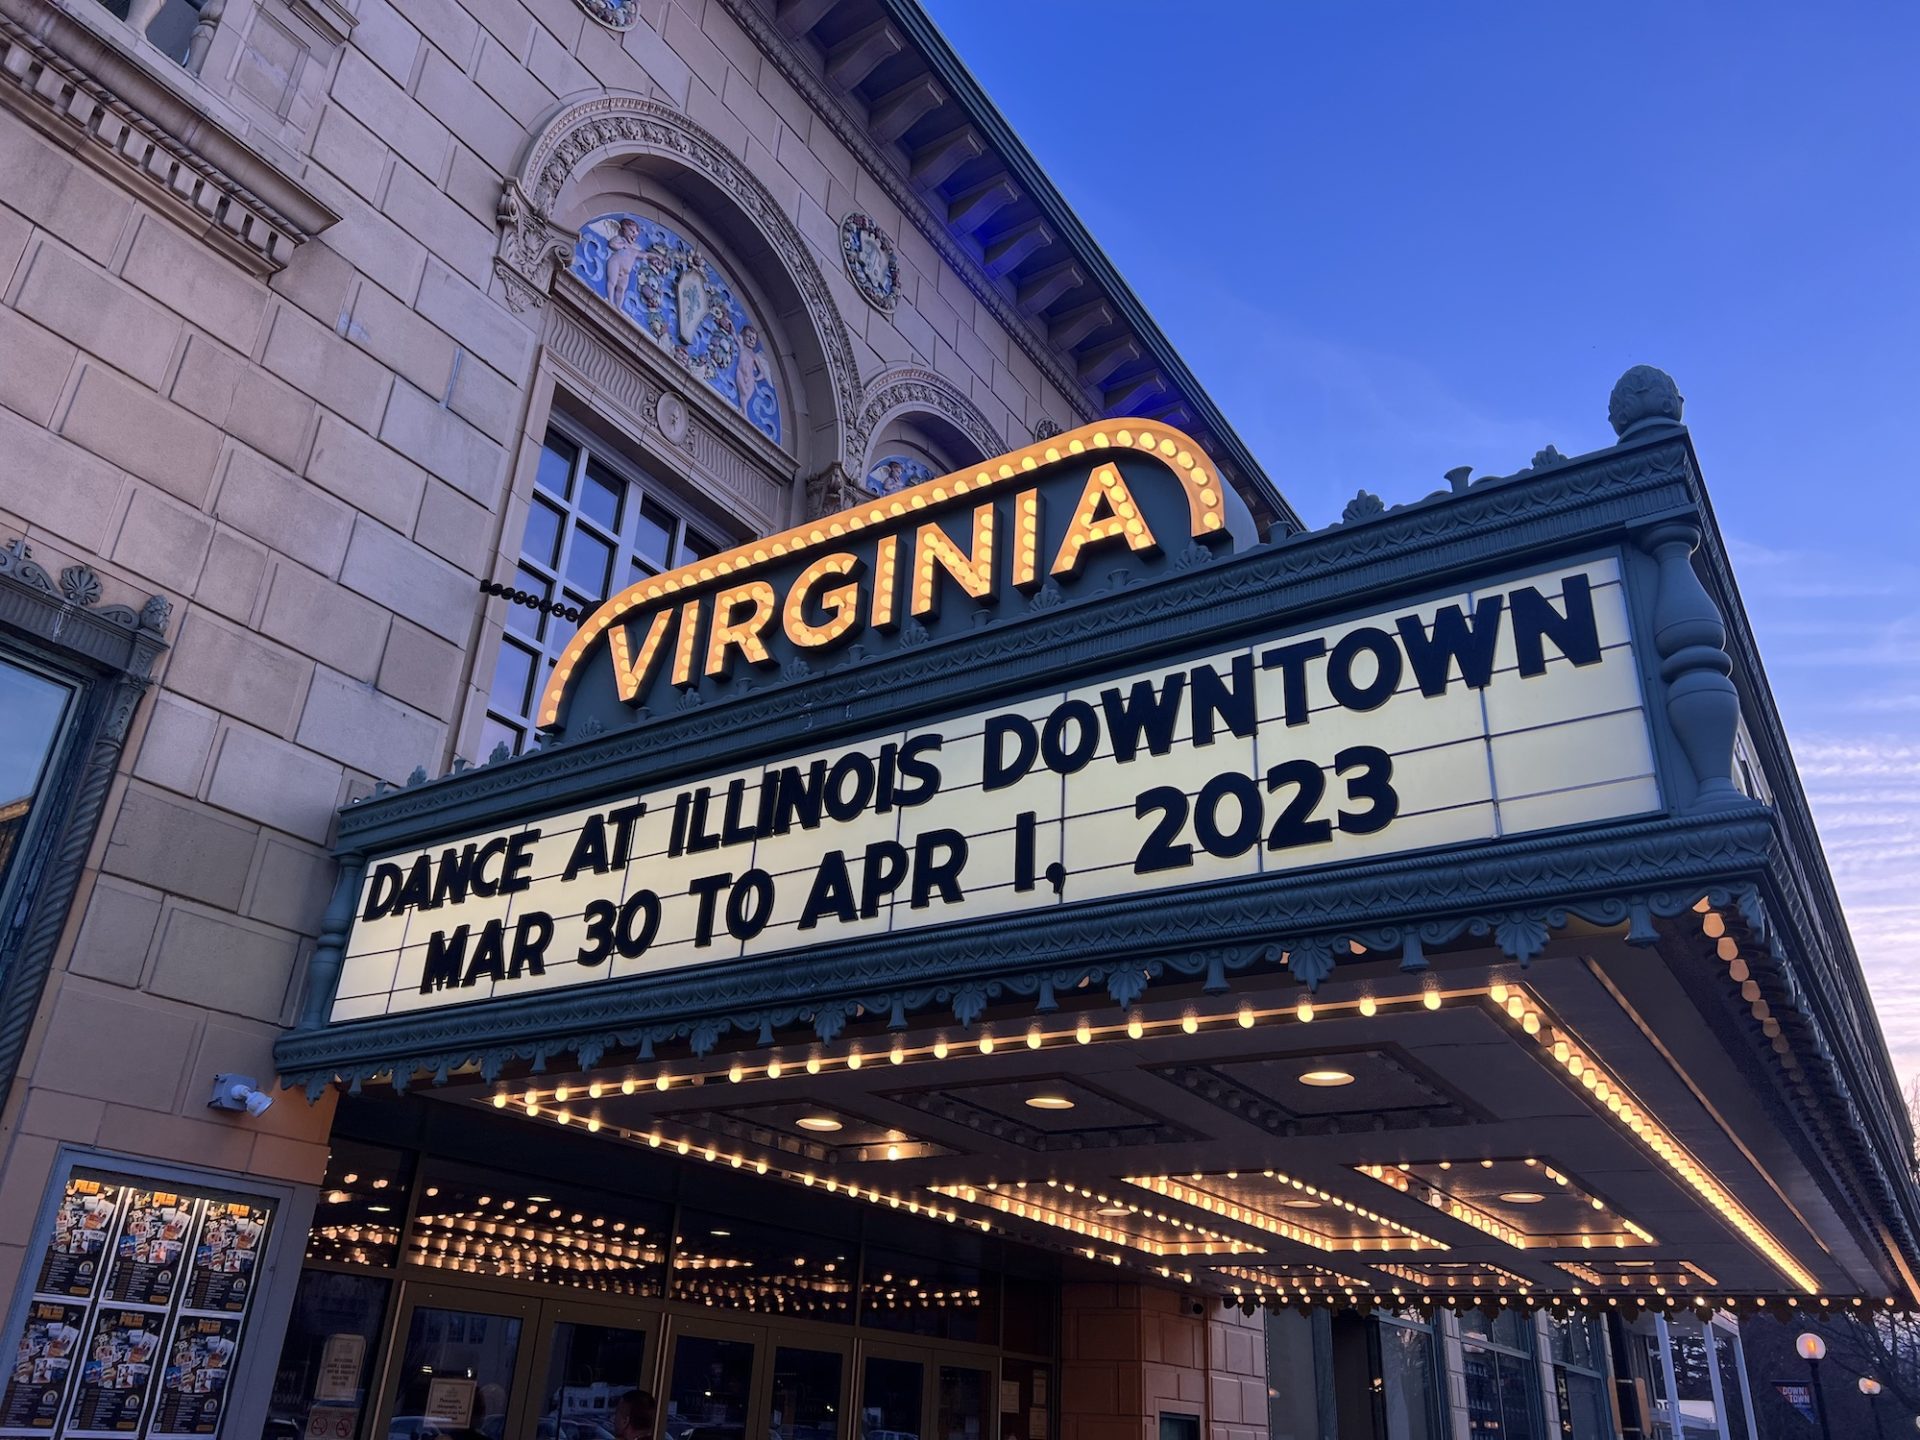 Dance at Illinois Downtown makes a beautiful debut at The Virginia Theatre